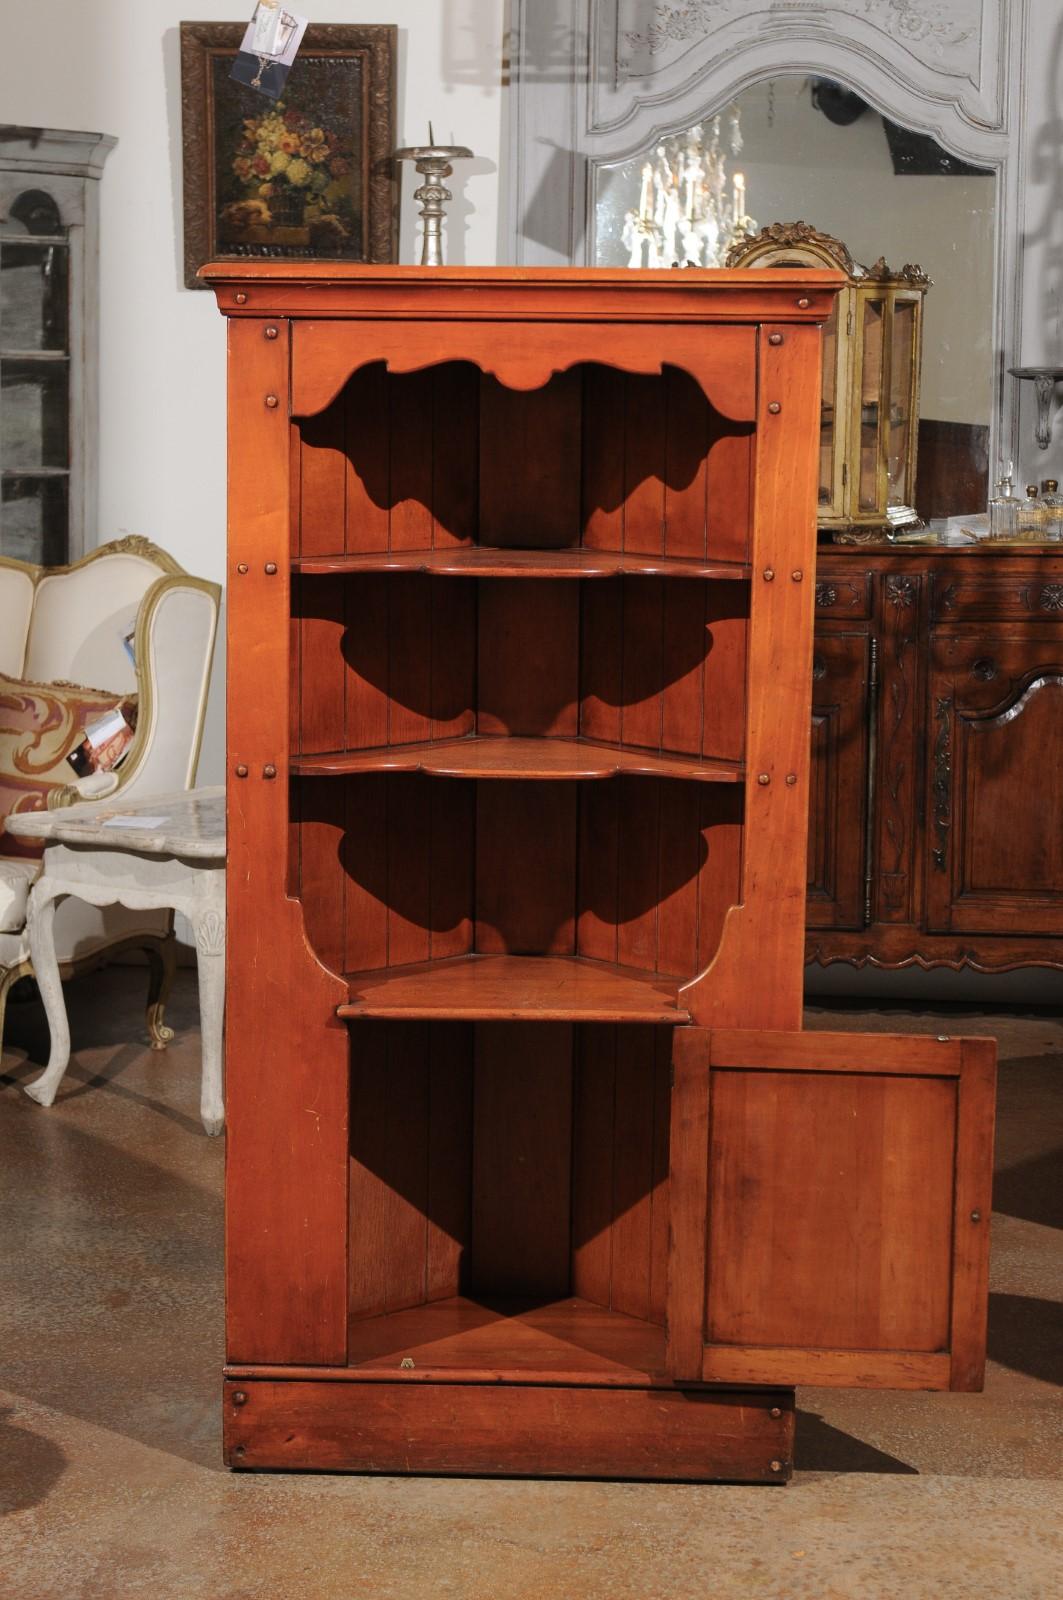 Early 20th Century American Cherry Corner Cabinet with Shelves and Single Door 3